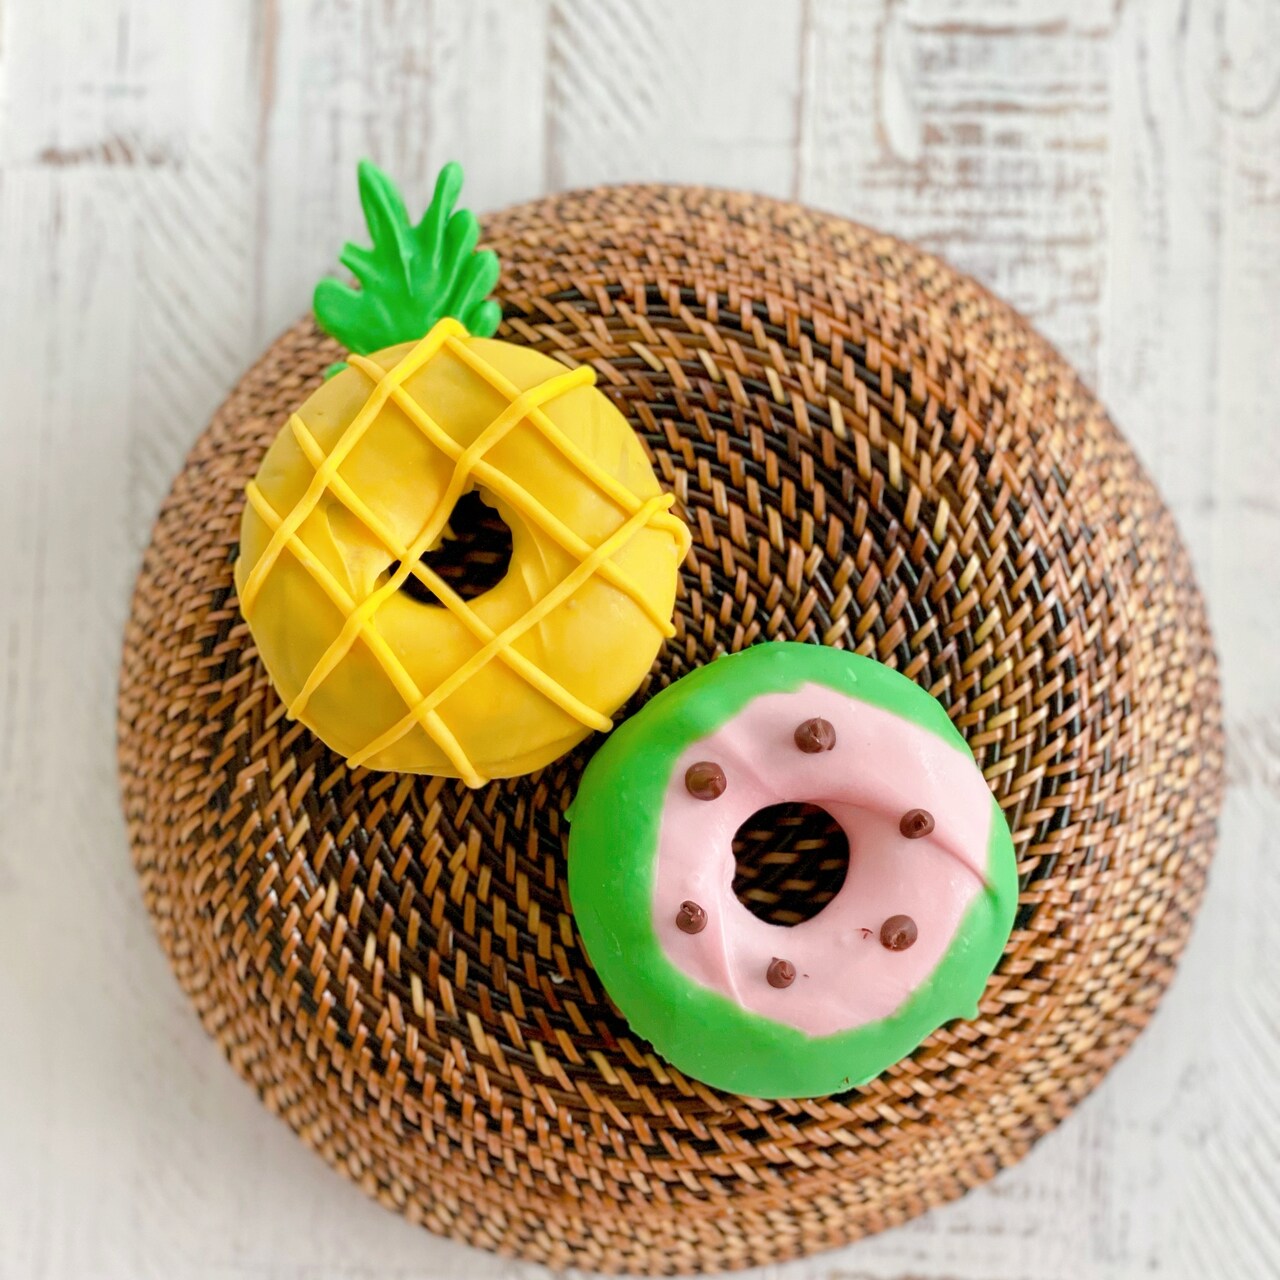 End of Summer Fruit Themed Donuts with @wildbakes